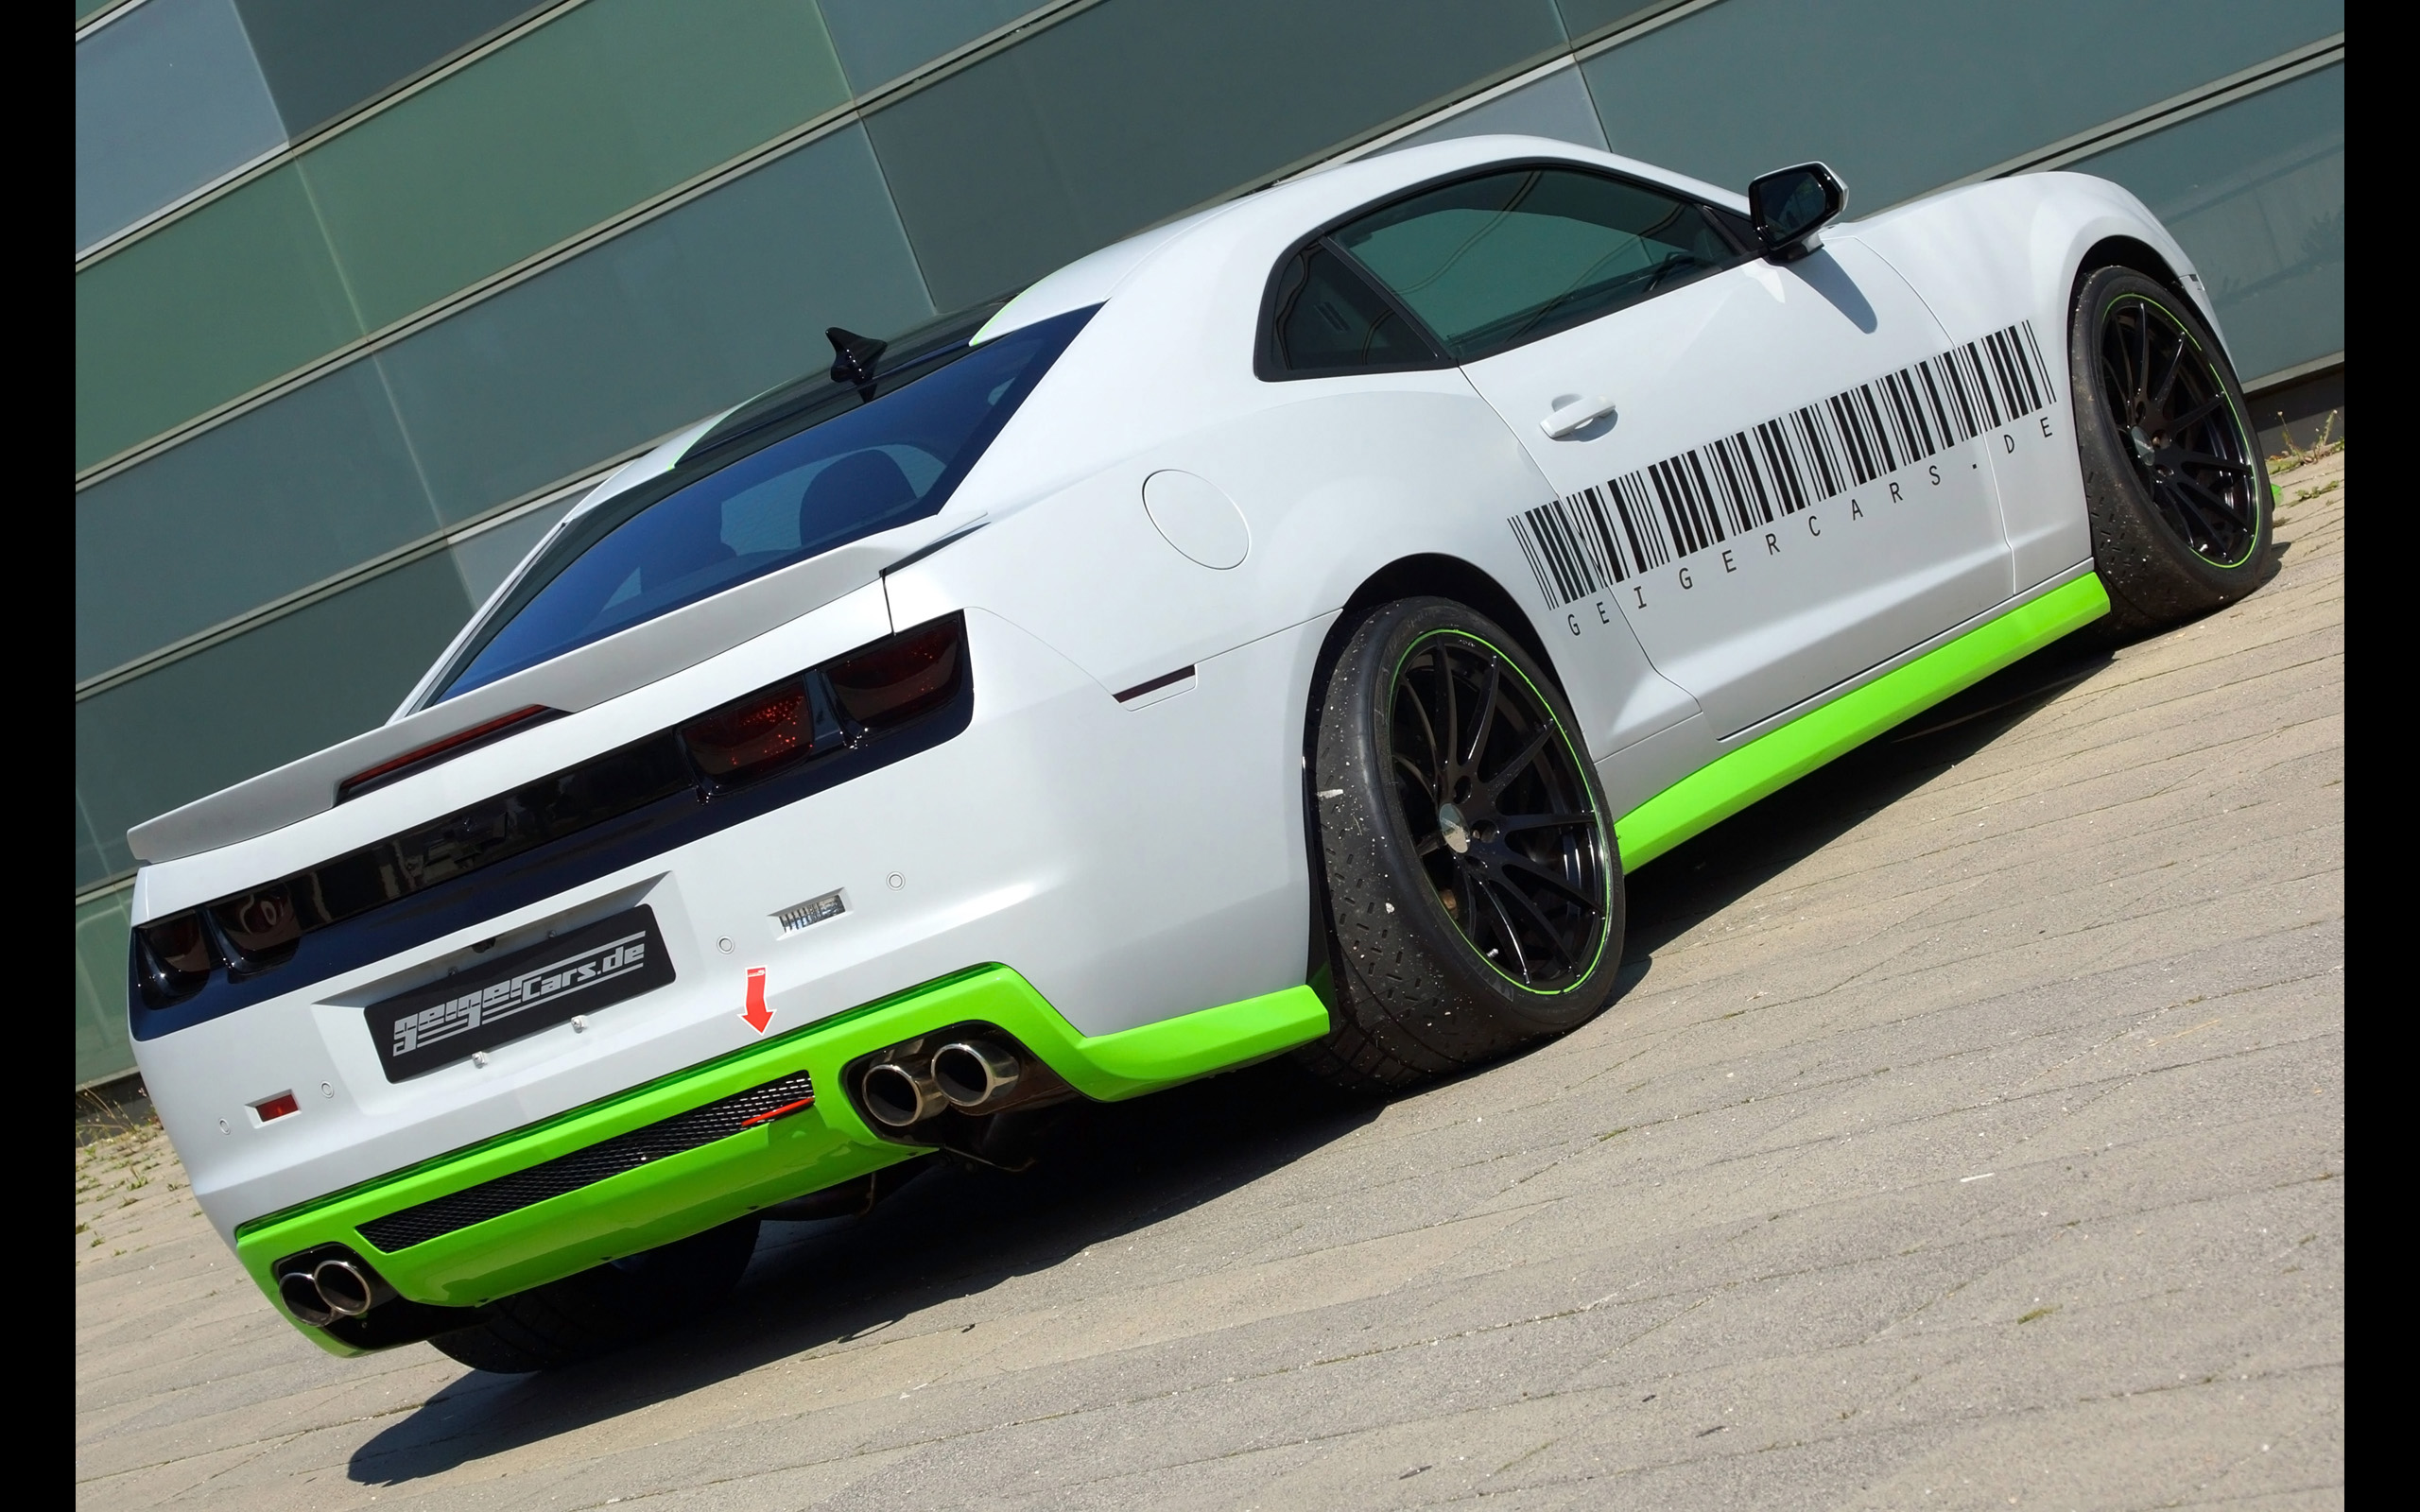 2013, Geigercars, Chevrolet, Camaro, Ls9, Muscle, Tuning Wallpaper